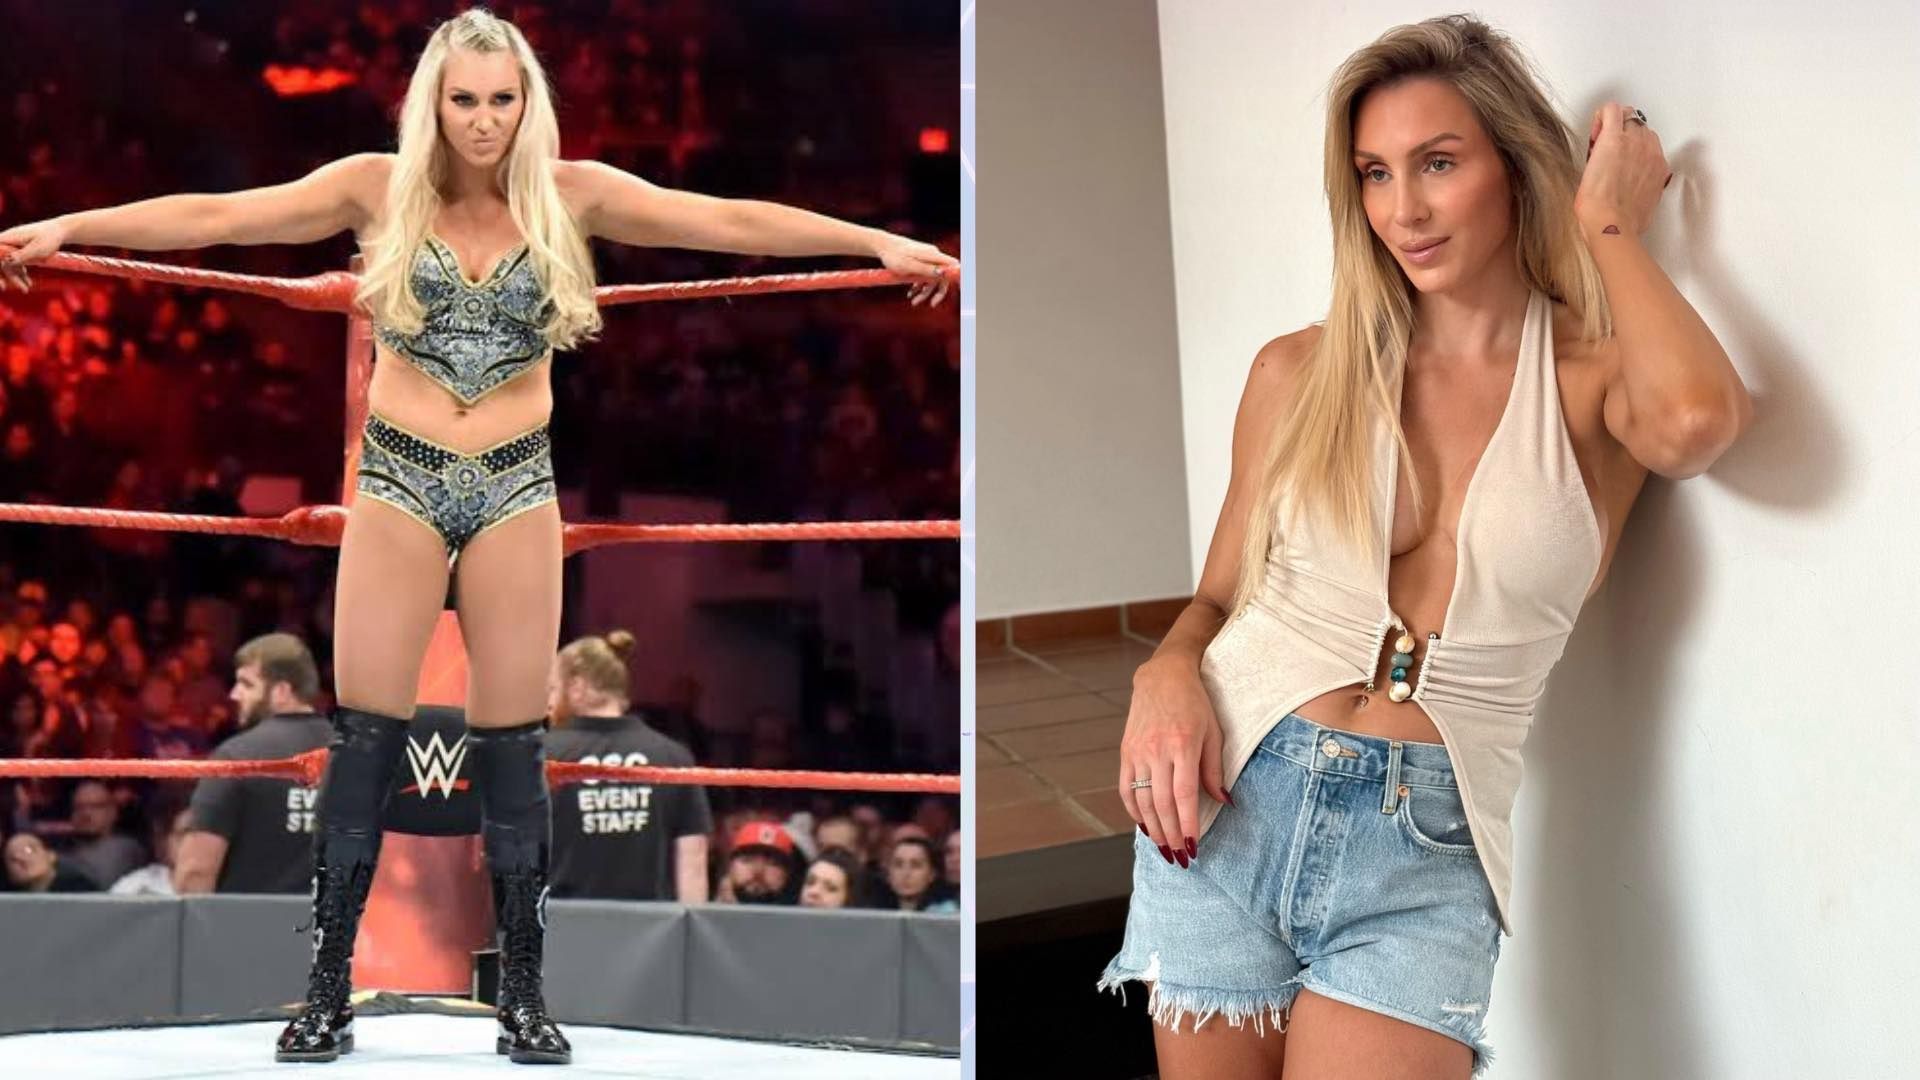 Charlotte Flair responds to motivating messages as she recovers [Image Credits: WWE/Charlotte Flair]